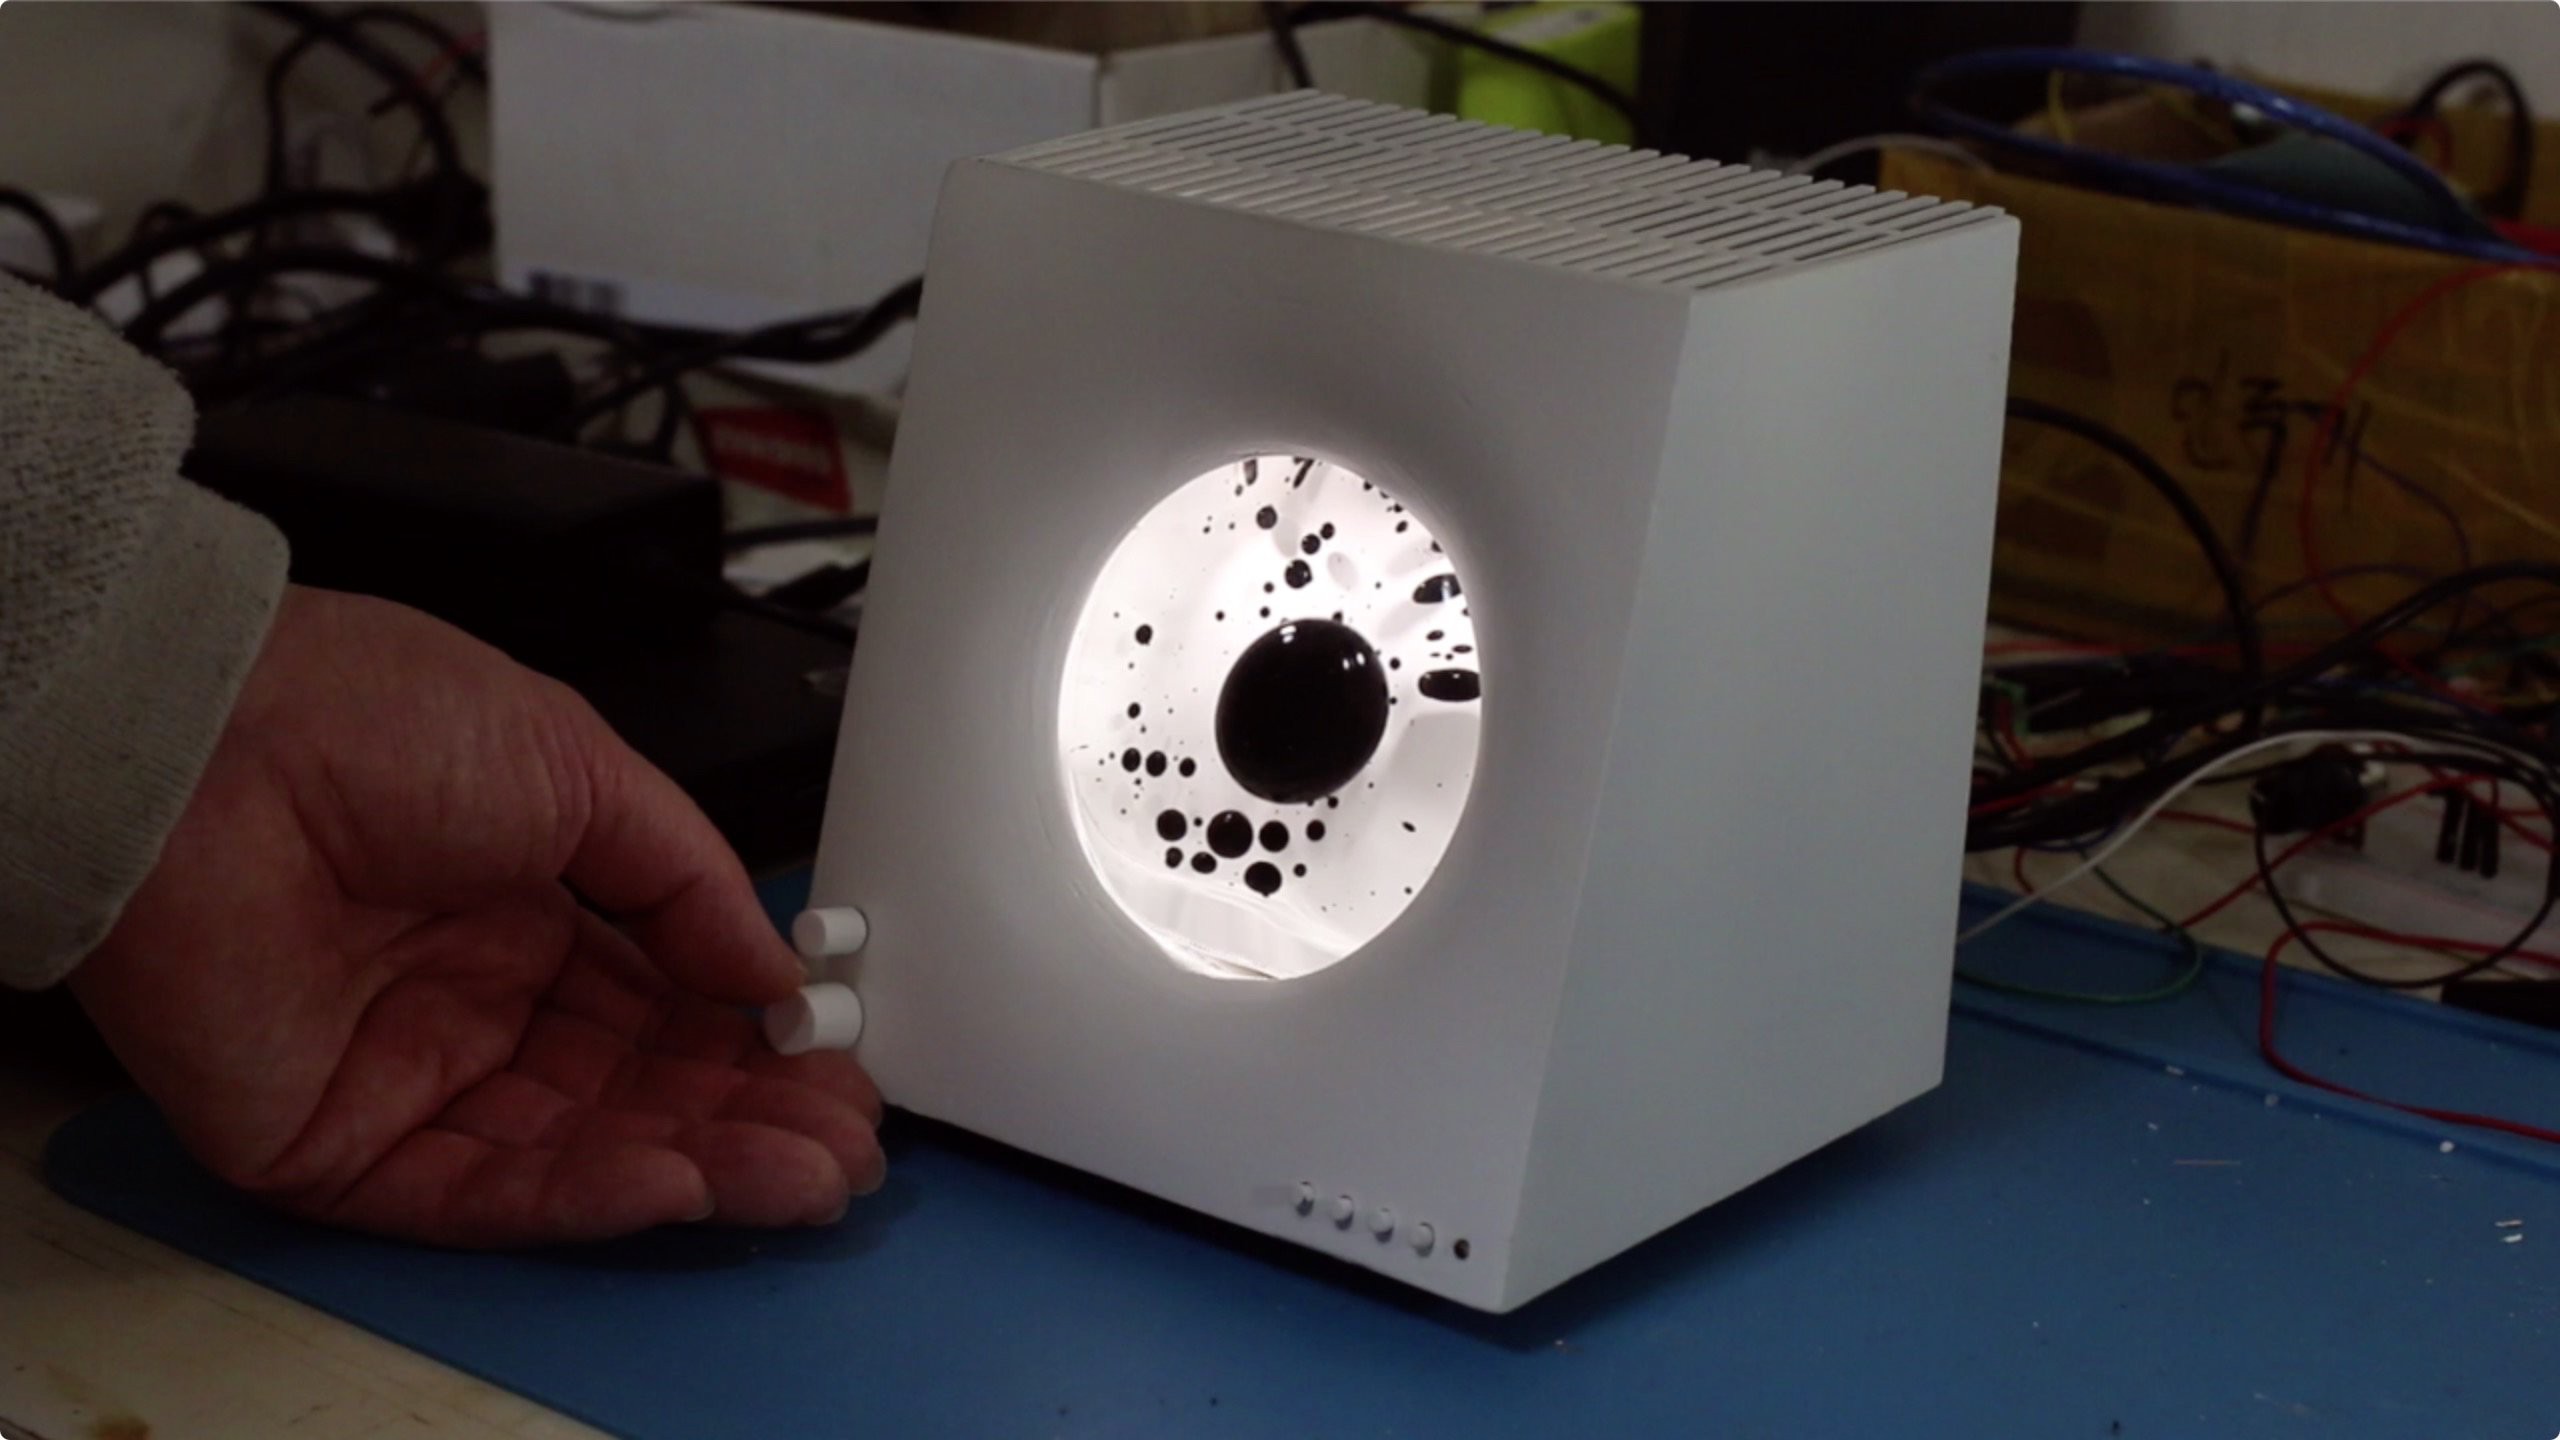 This DIY Bluetooth speaker’s magical ferrofluid display reacts to the music